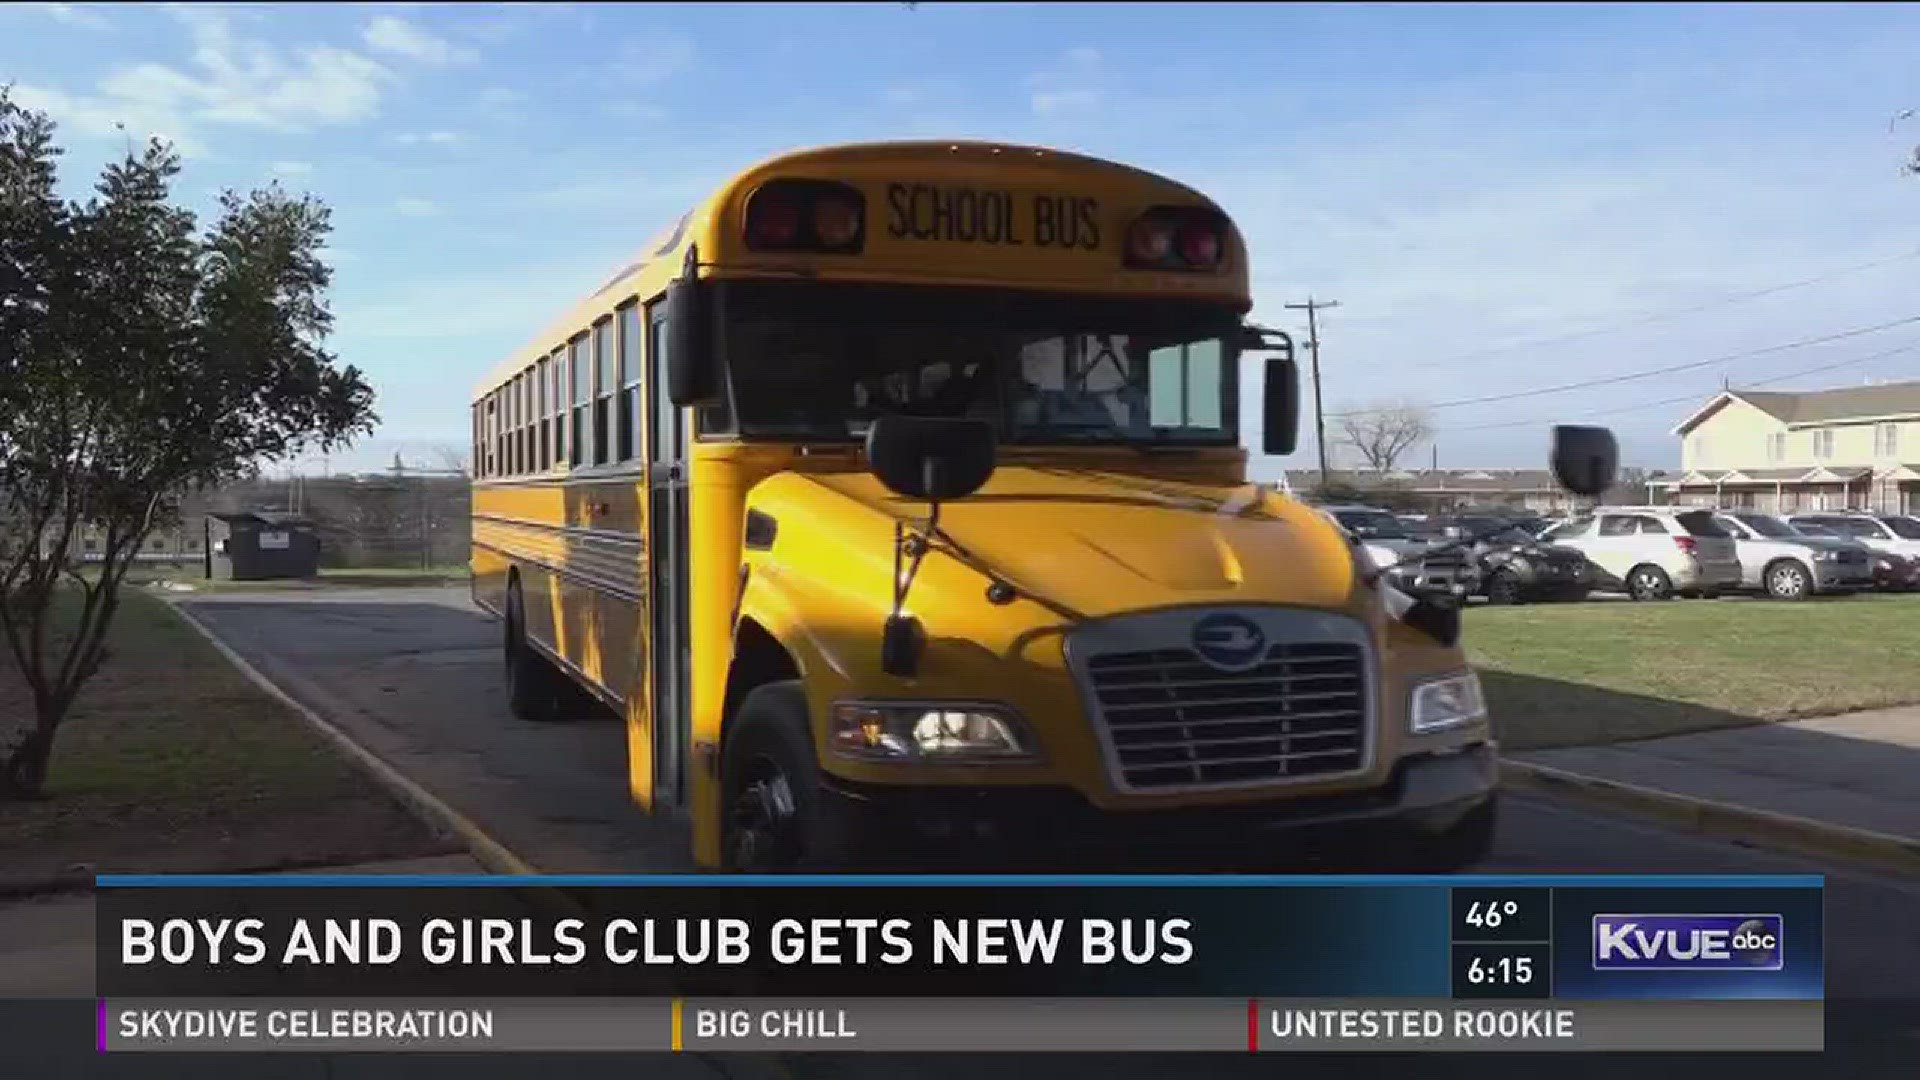 More than 200 donors helped pay for the new bus for the Boys and Girls Club.